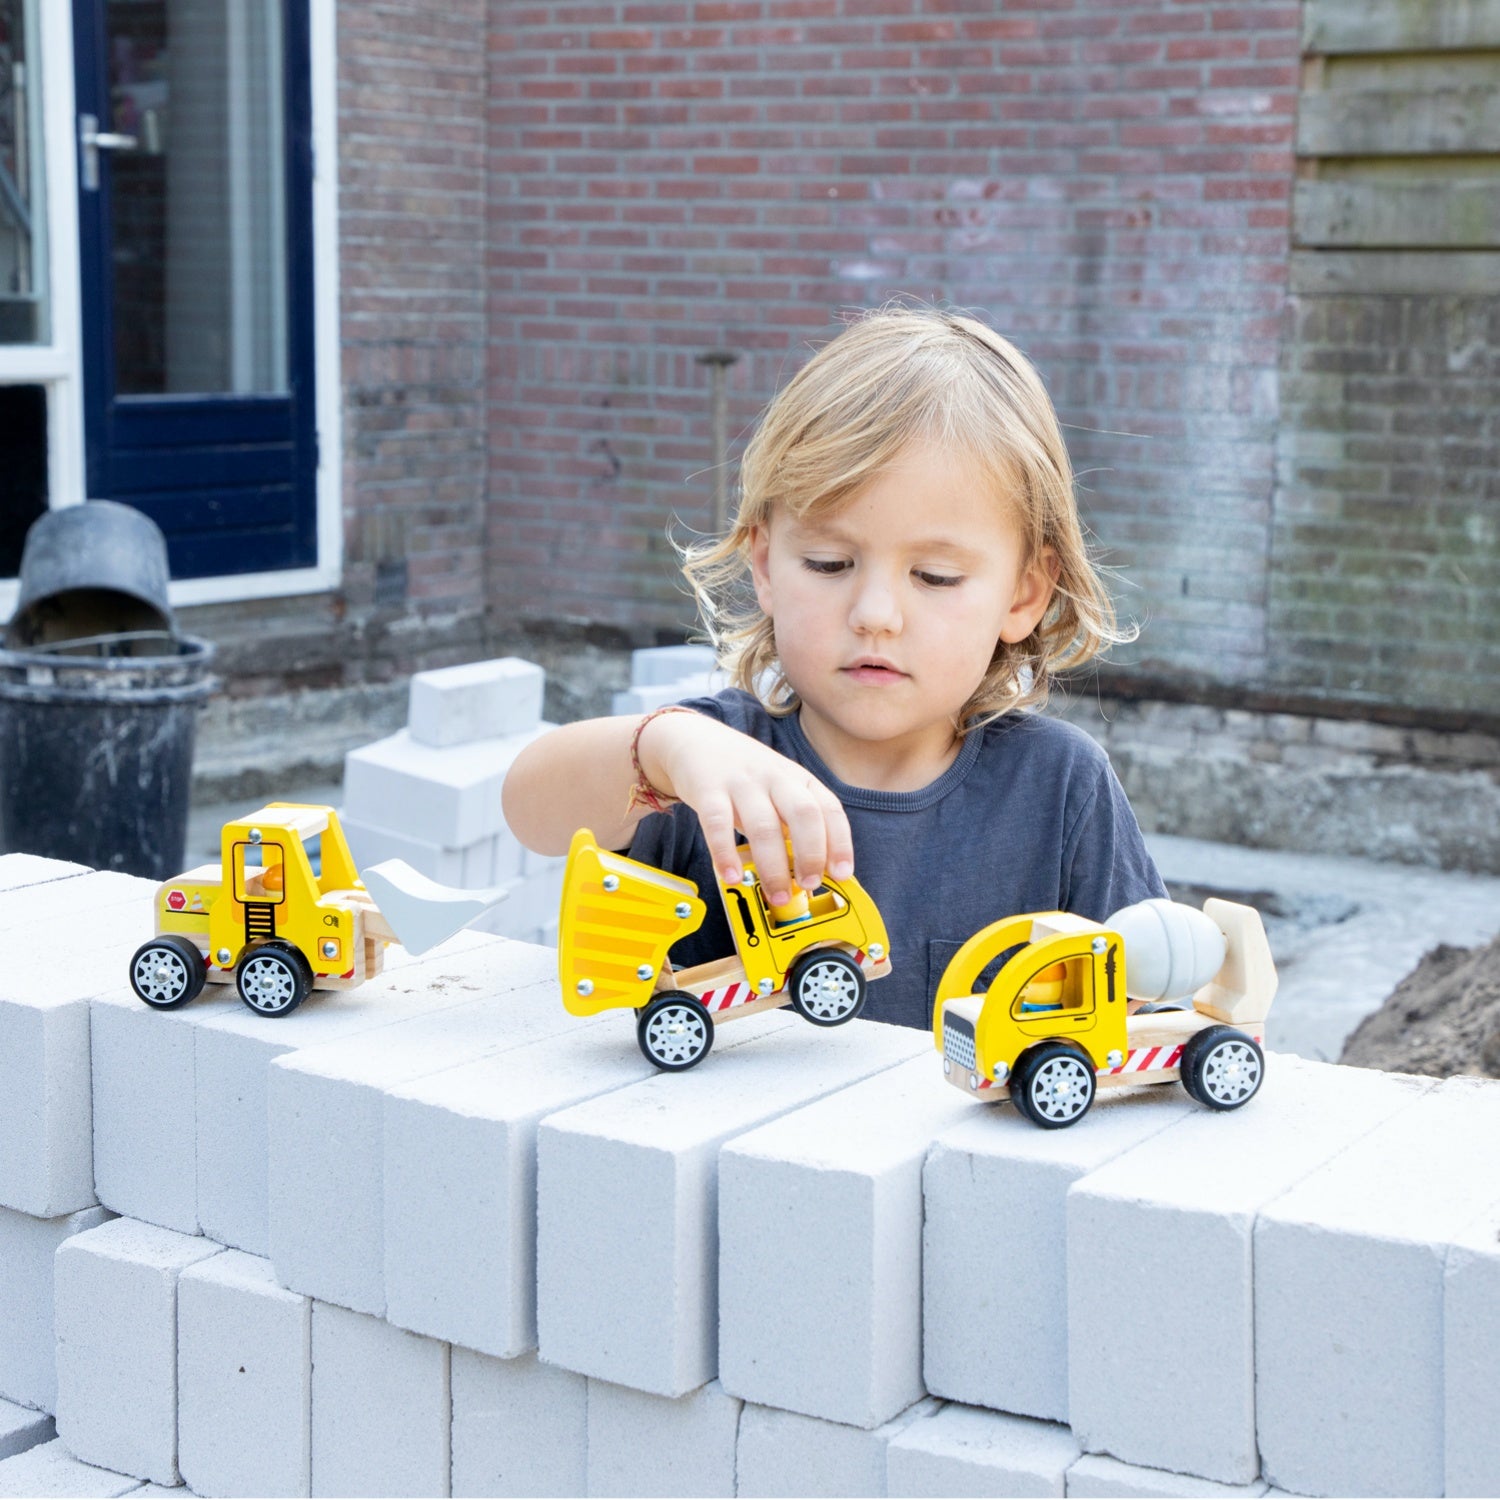 New Classic Toys Wooden Toy Construction Site Vehicle Set | Baby & Toddler Activity Wooden Toy | Lifestyle – Child Playing on Wall | BeoVERDE.ie